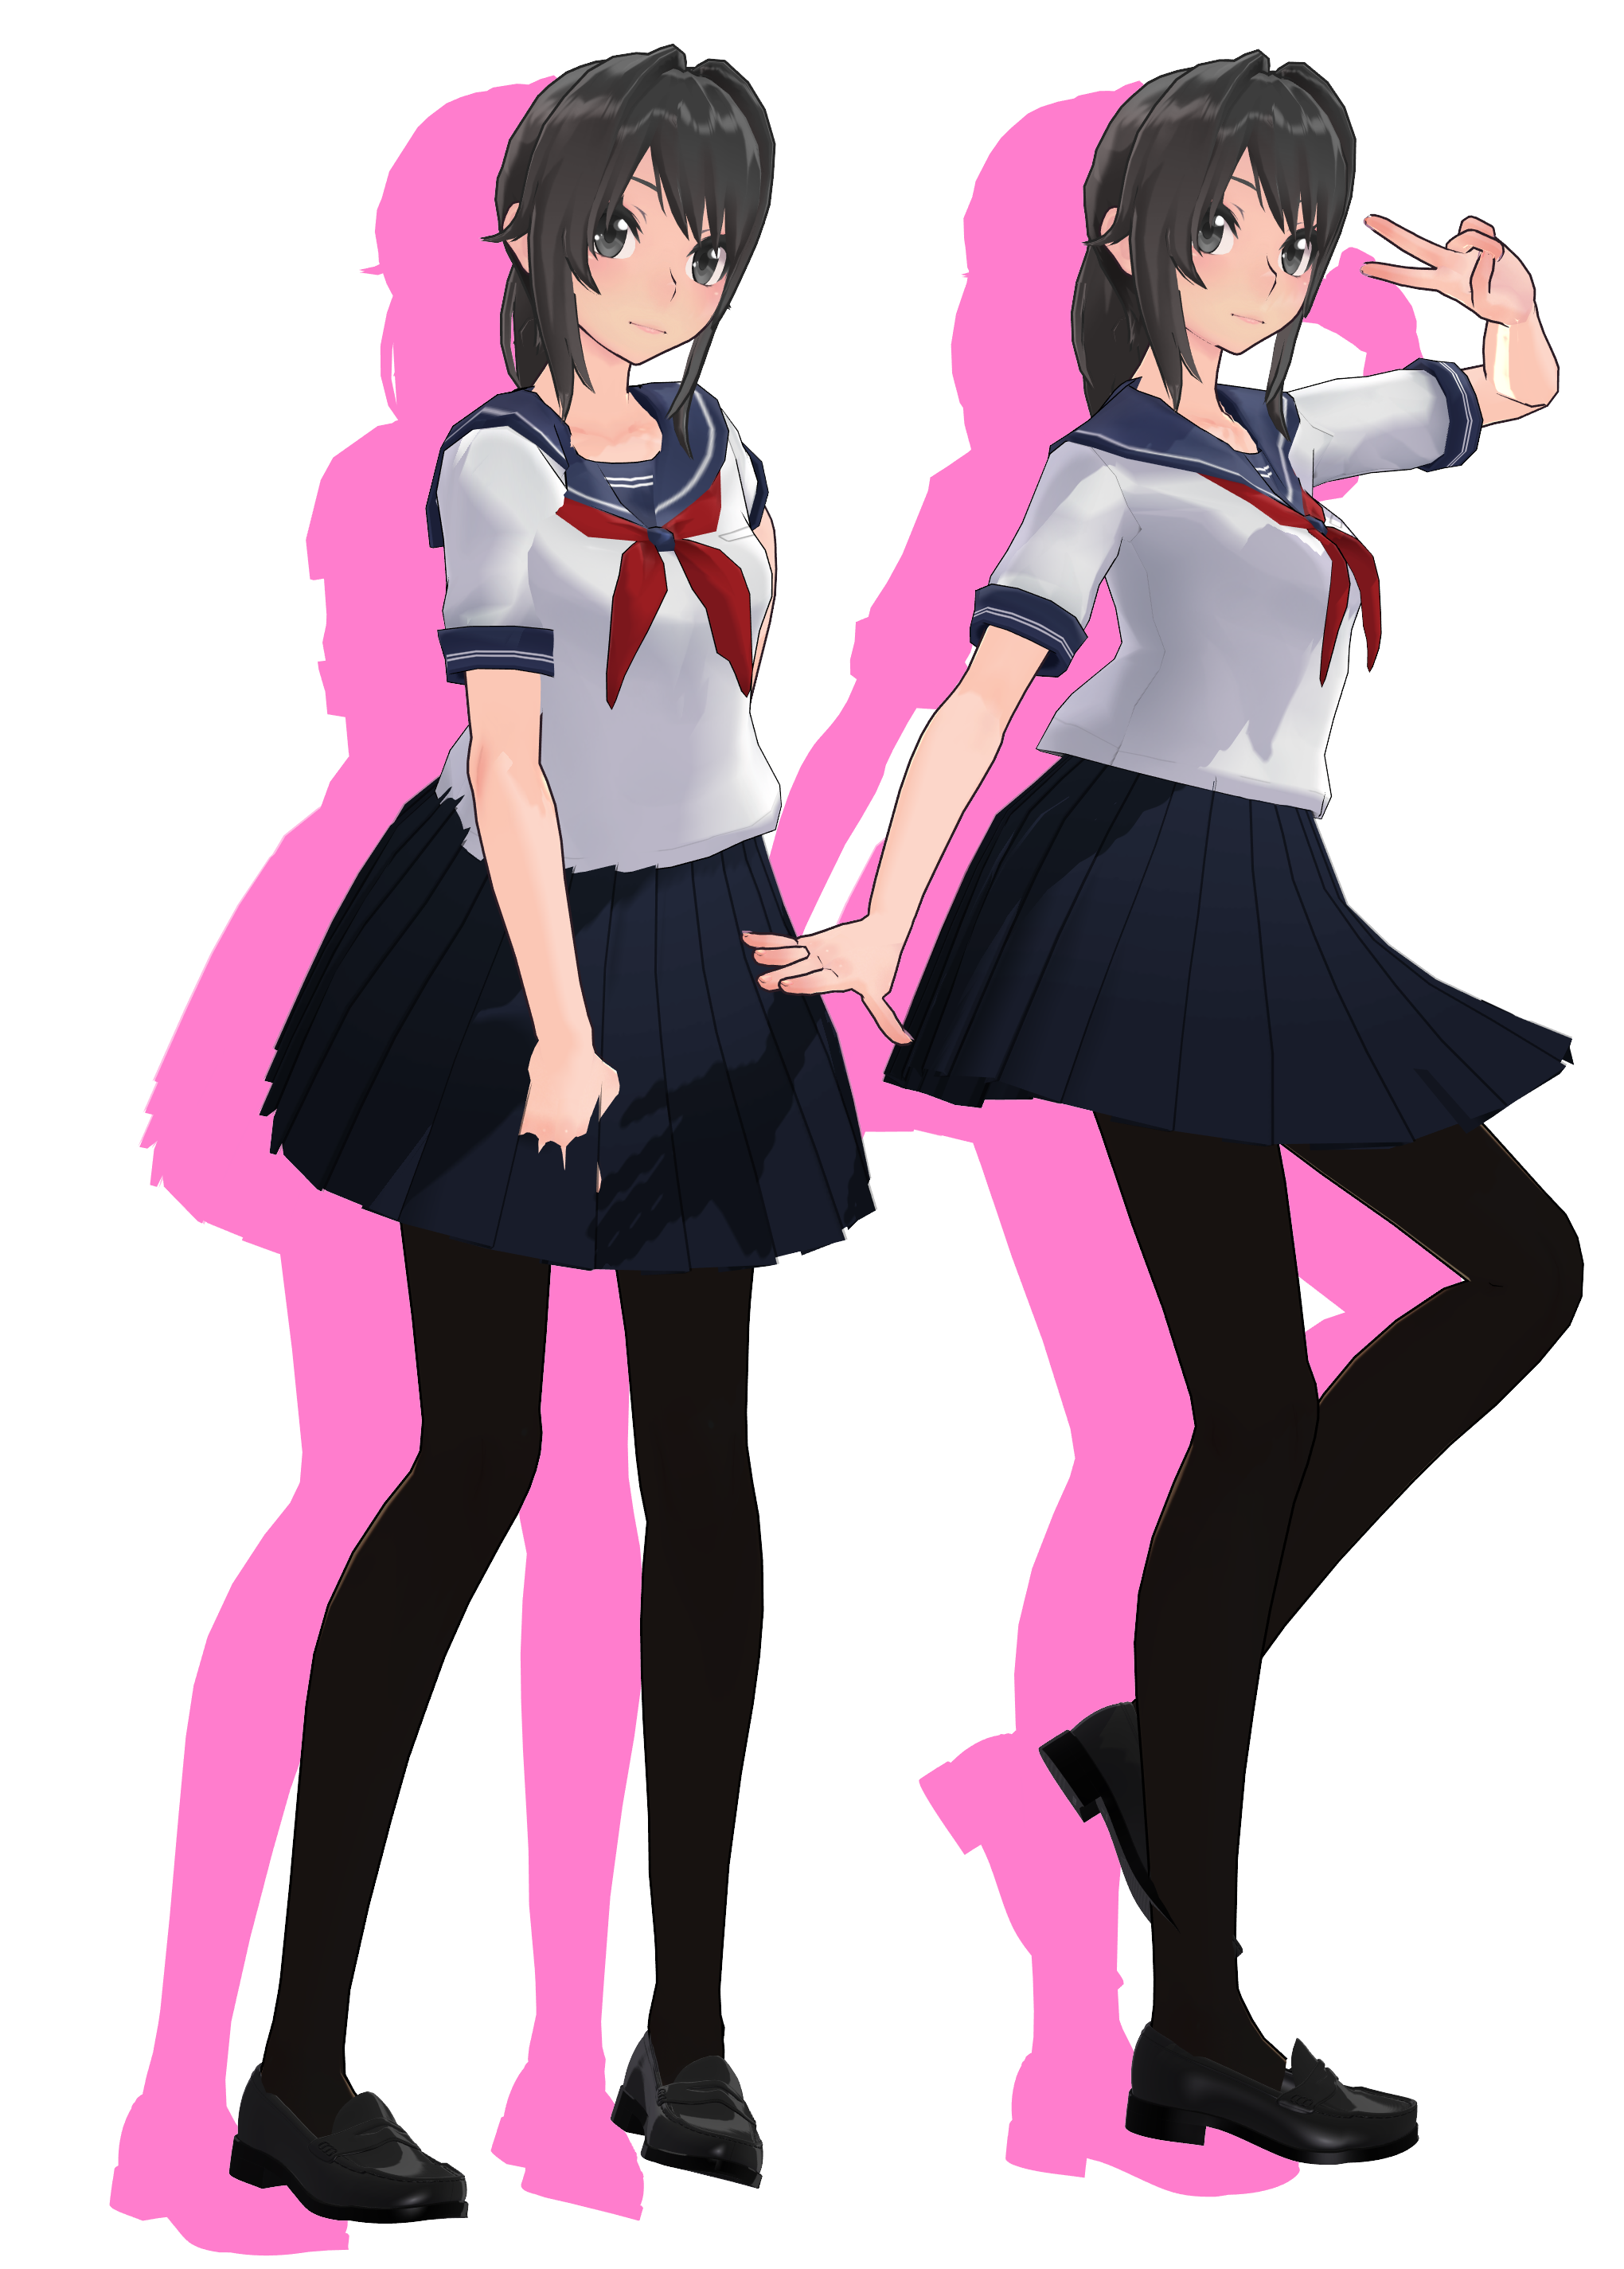 Have You Thought About Using The Mmd Models Of Yandere Simulator I